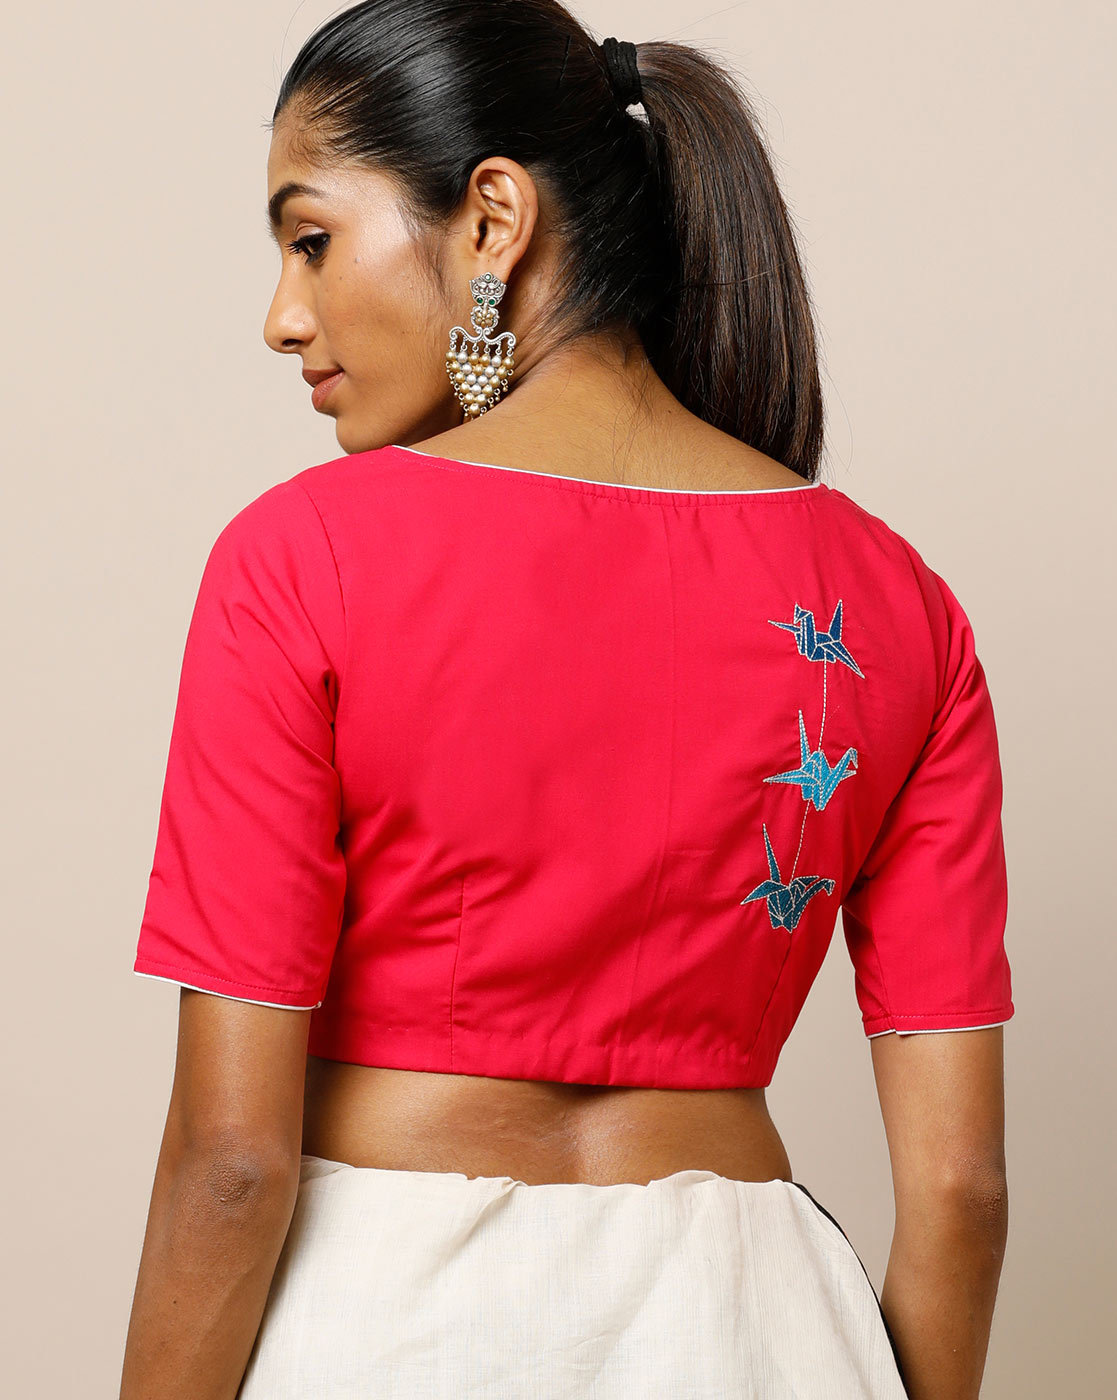 blouse-back-with-embroidery-designs-2019 (21)